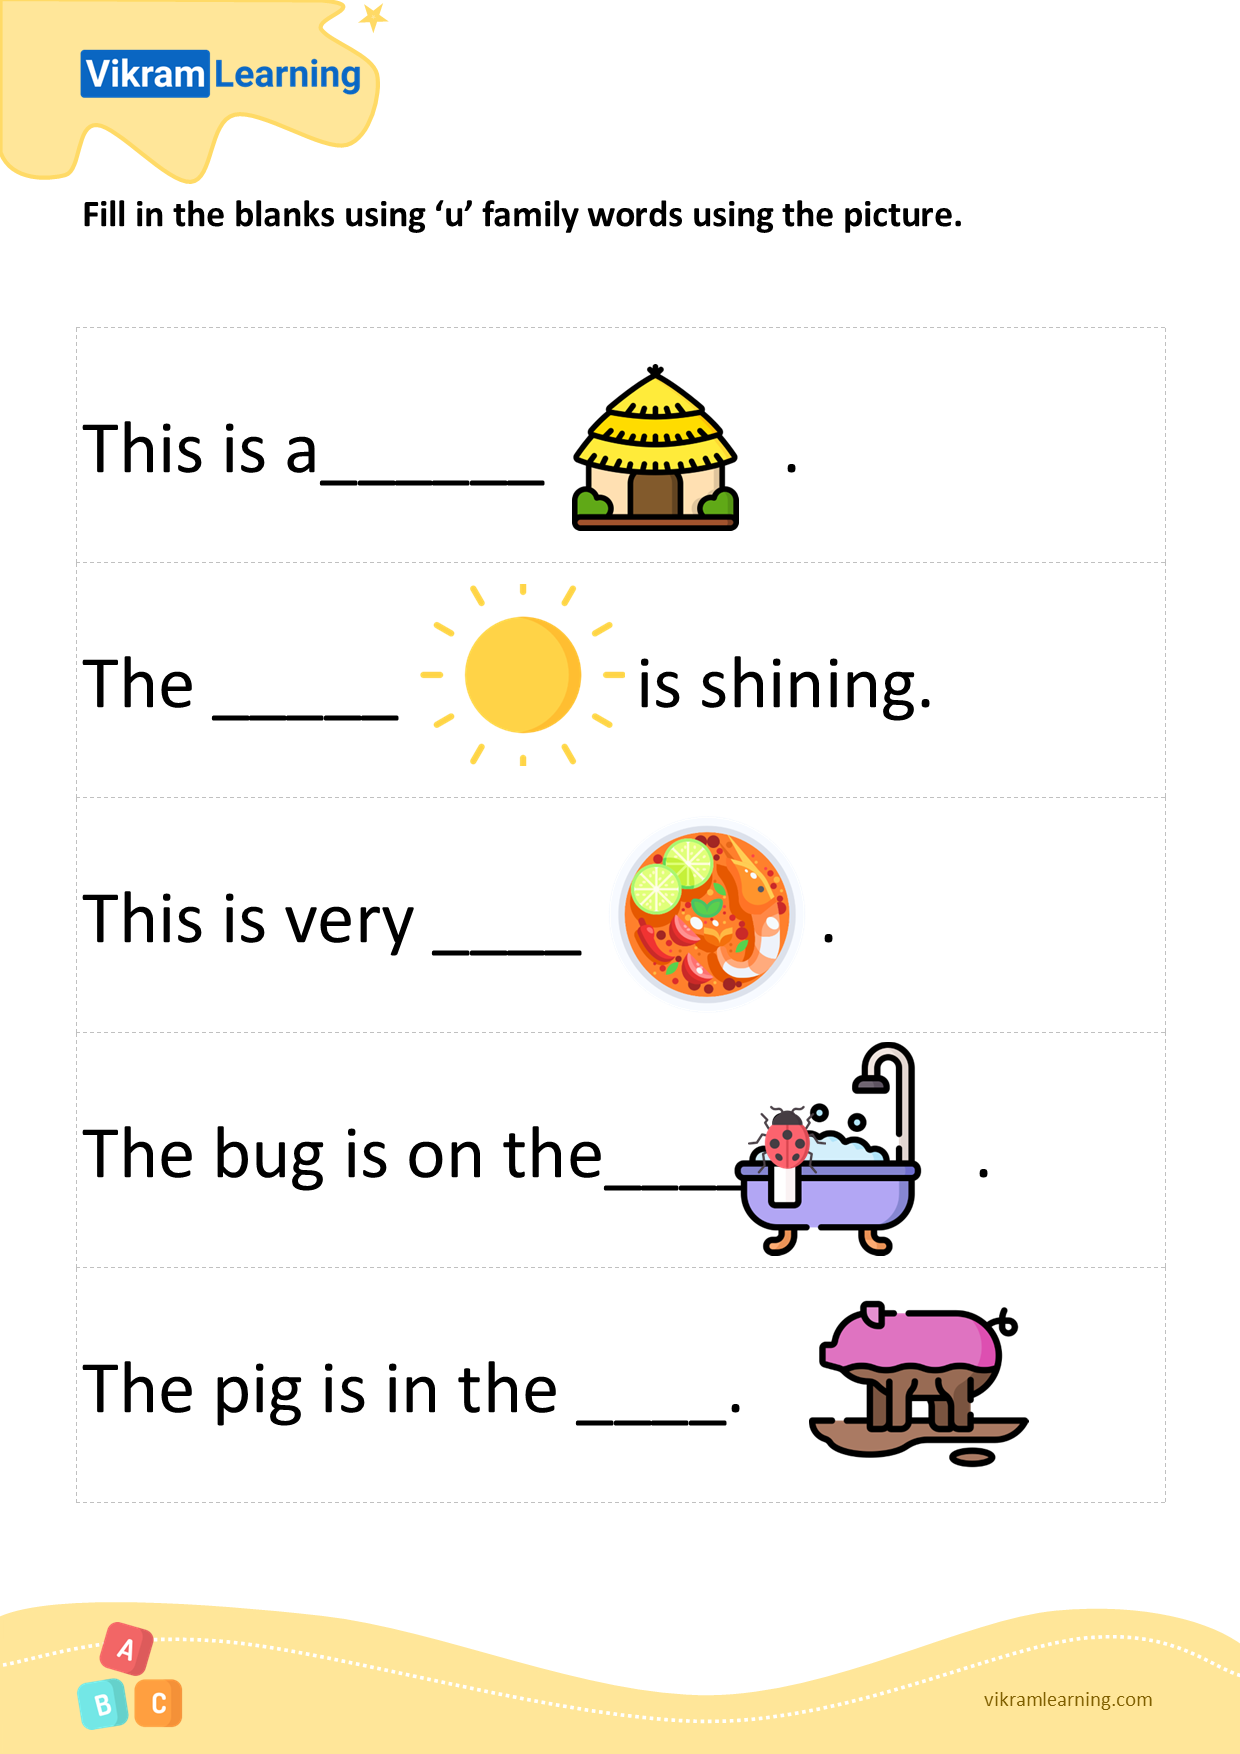 Download fill in the blanks using 'u' family words using the picture worksheets